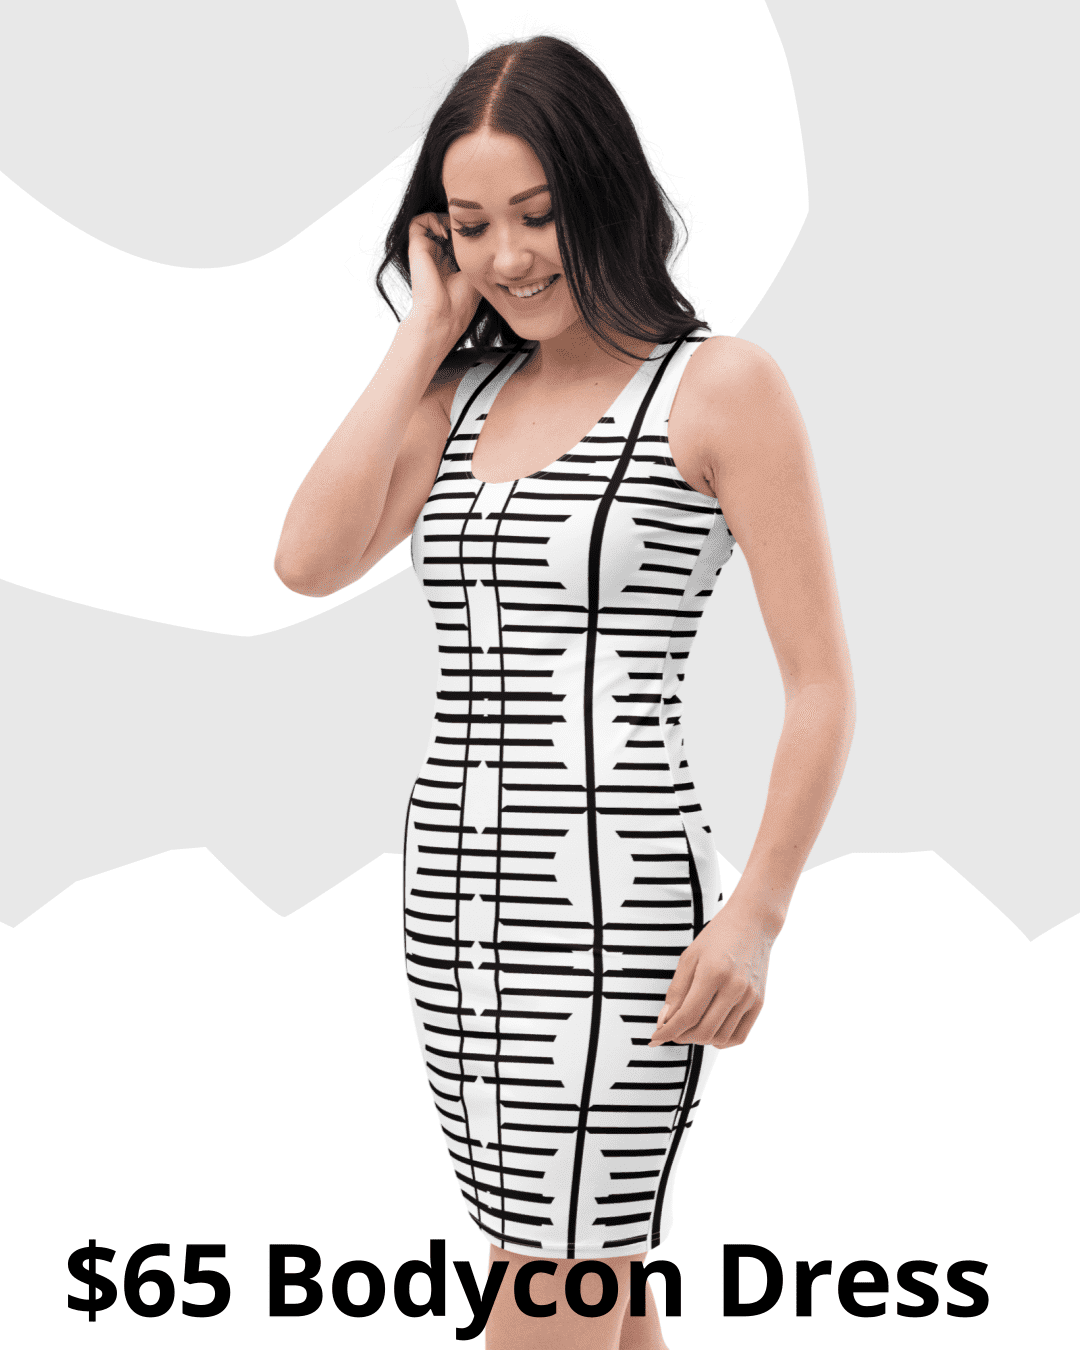 Black Bodycon Dress - Revive Wear     Black Bodycon Dress. 
Flatter your figure in this classic little black dress. This bodycon dress is a must-have essential for any wardrobe.  Shop your size today.